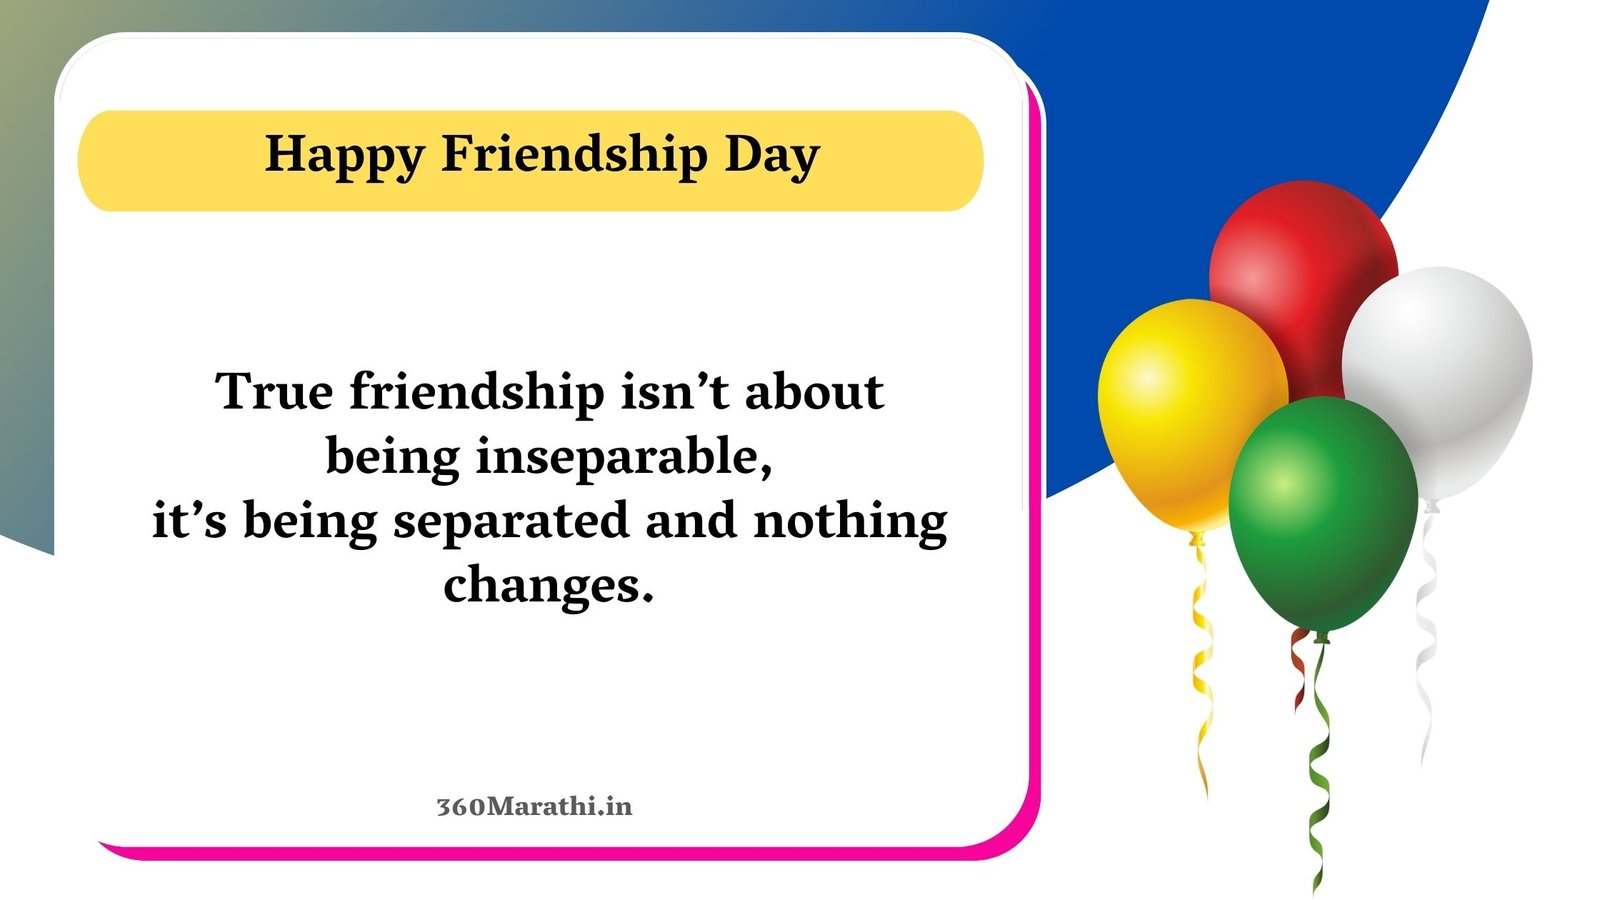 Friendship Day images 2021